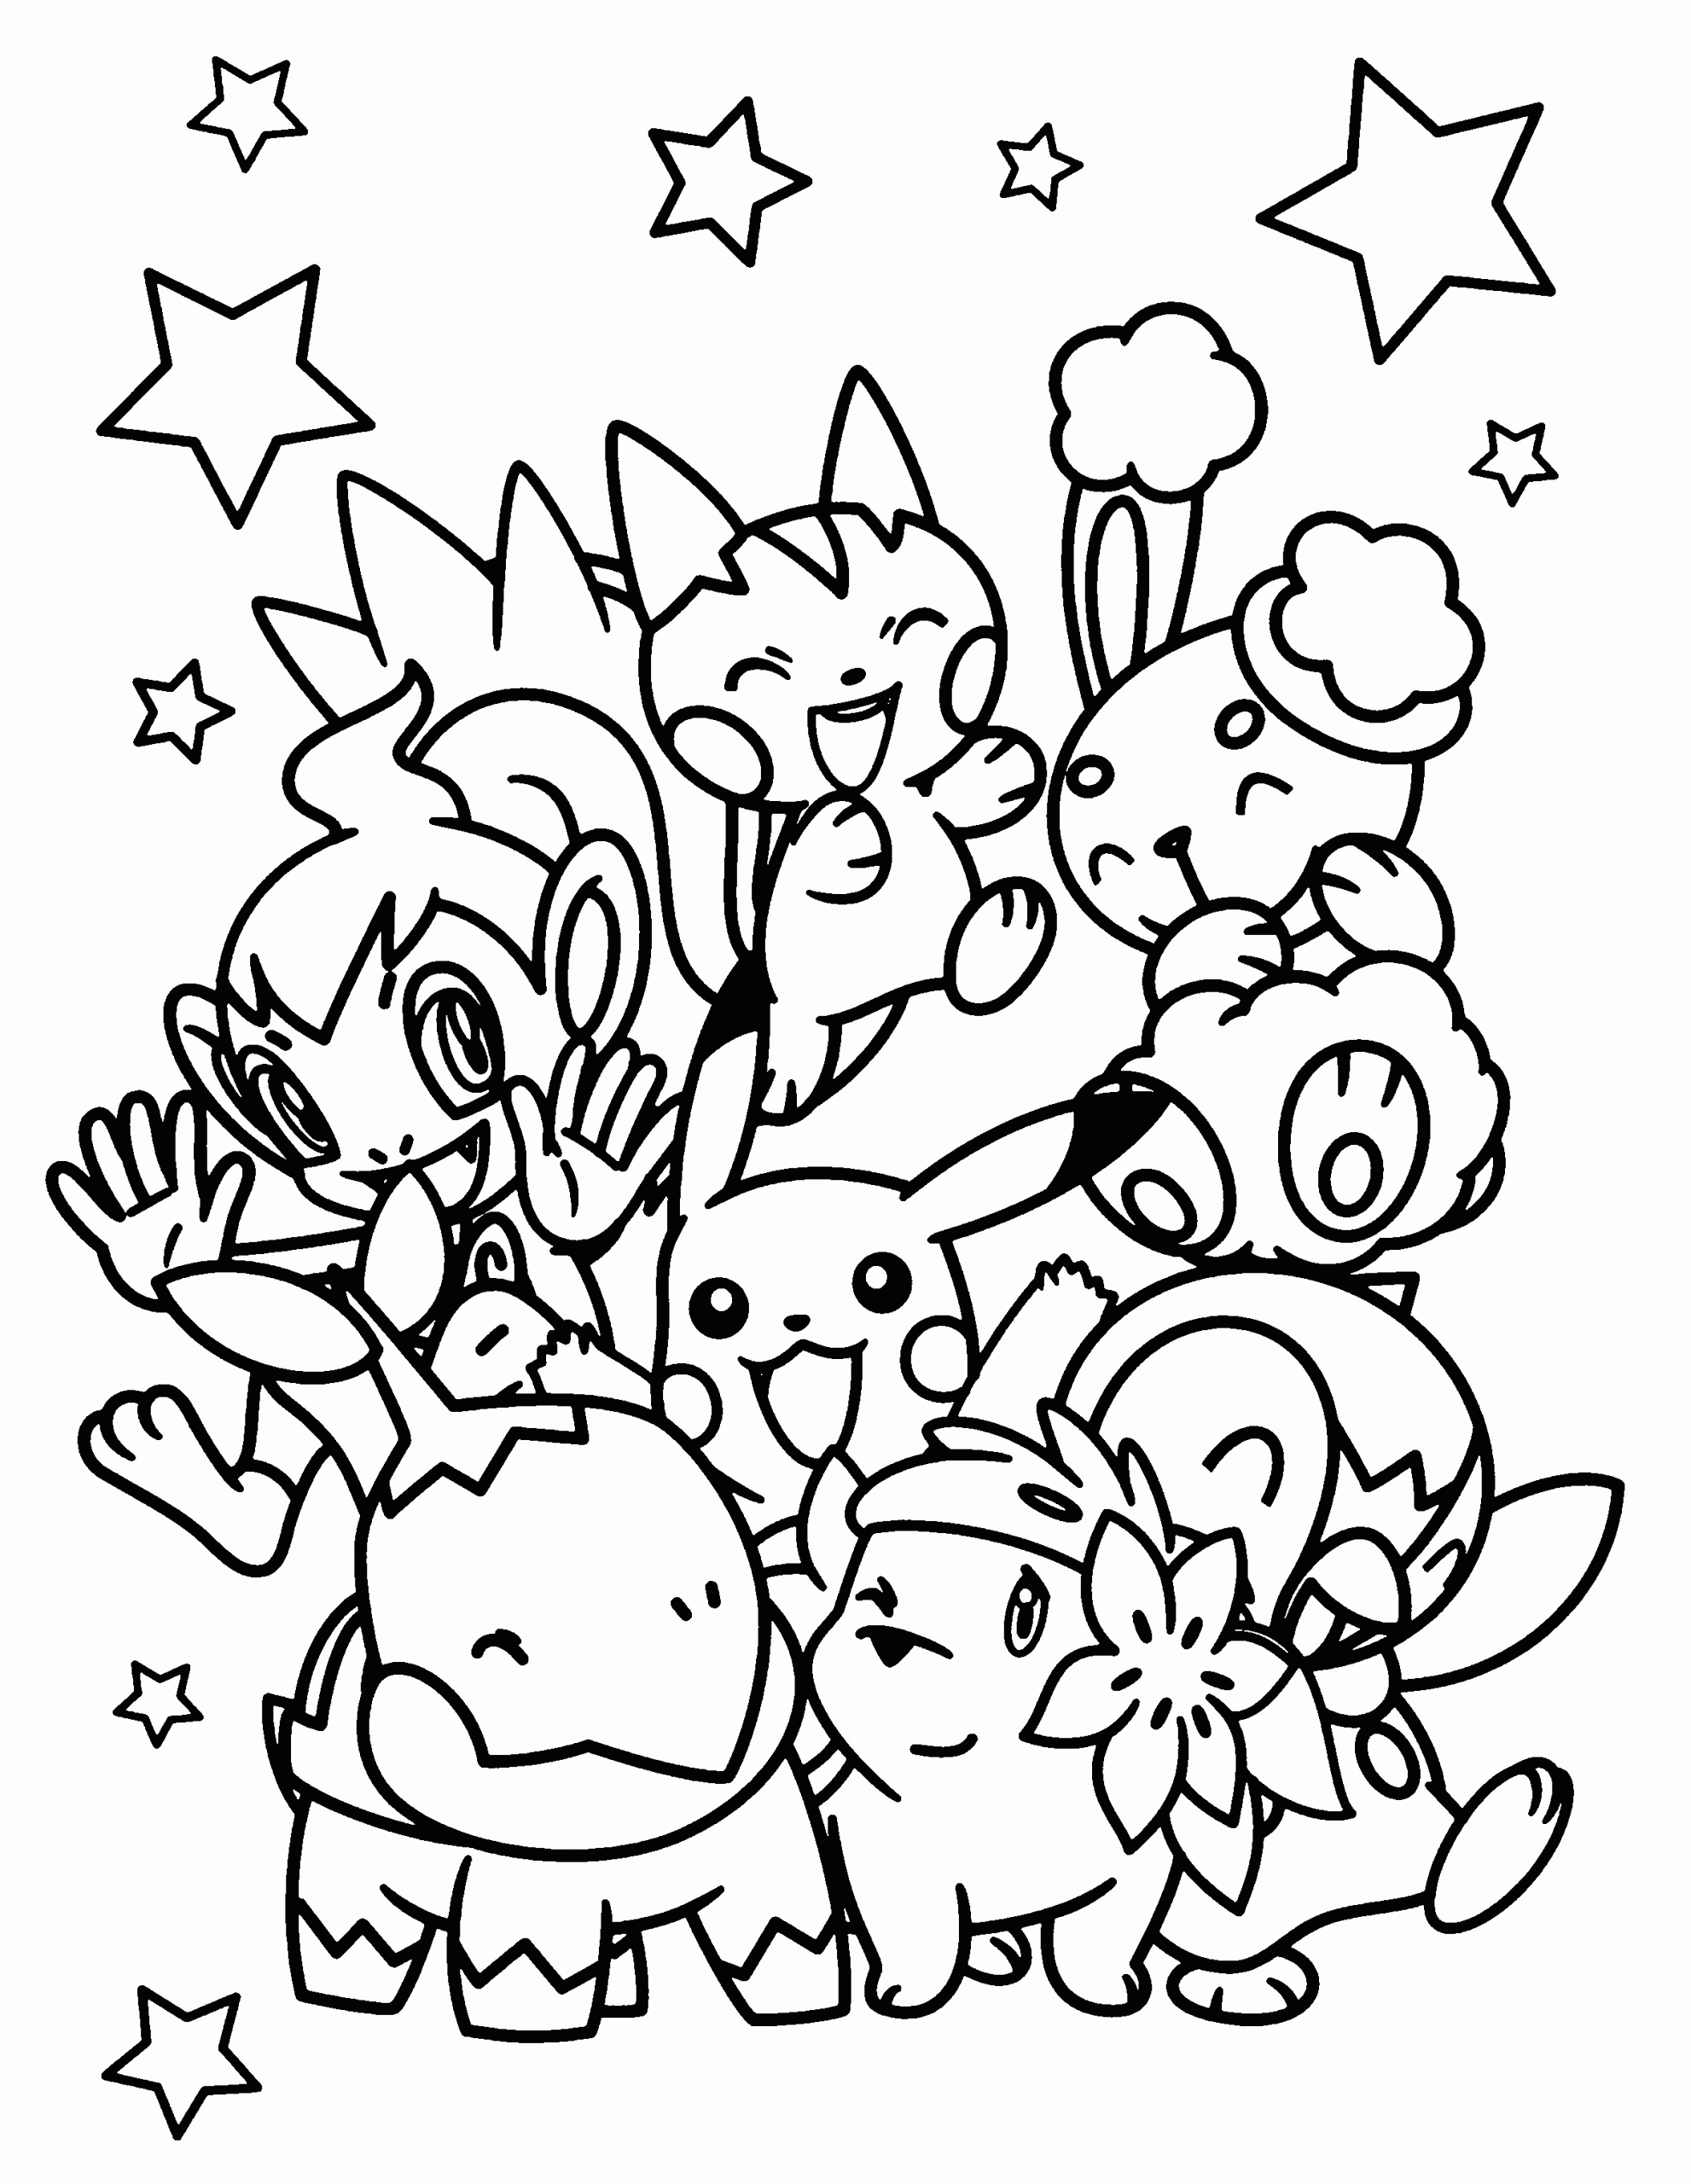 Kids Coloring Pages Pokemon
 Pokemon free to color for kids All Pokemon coloring